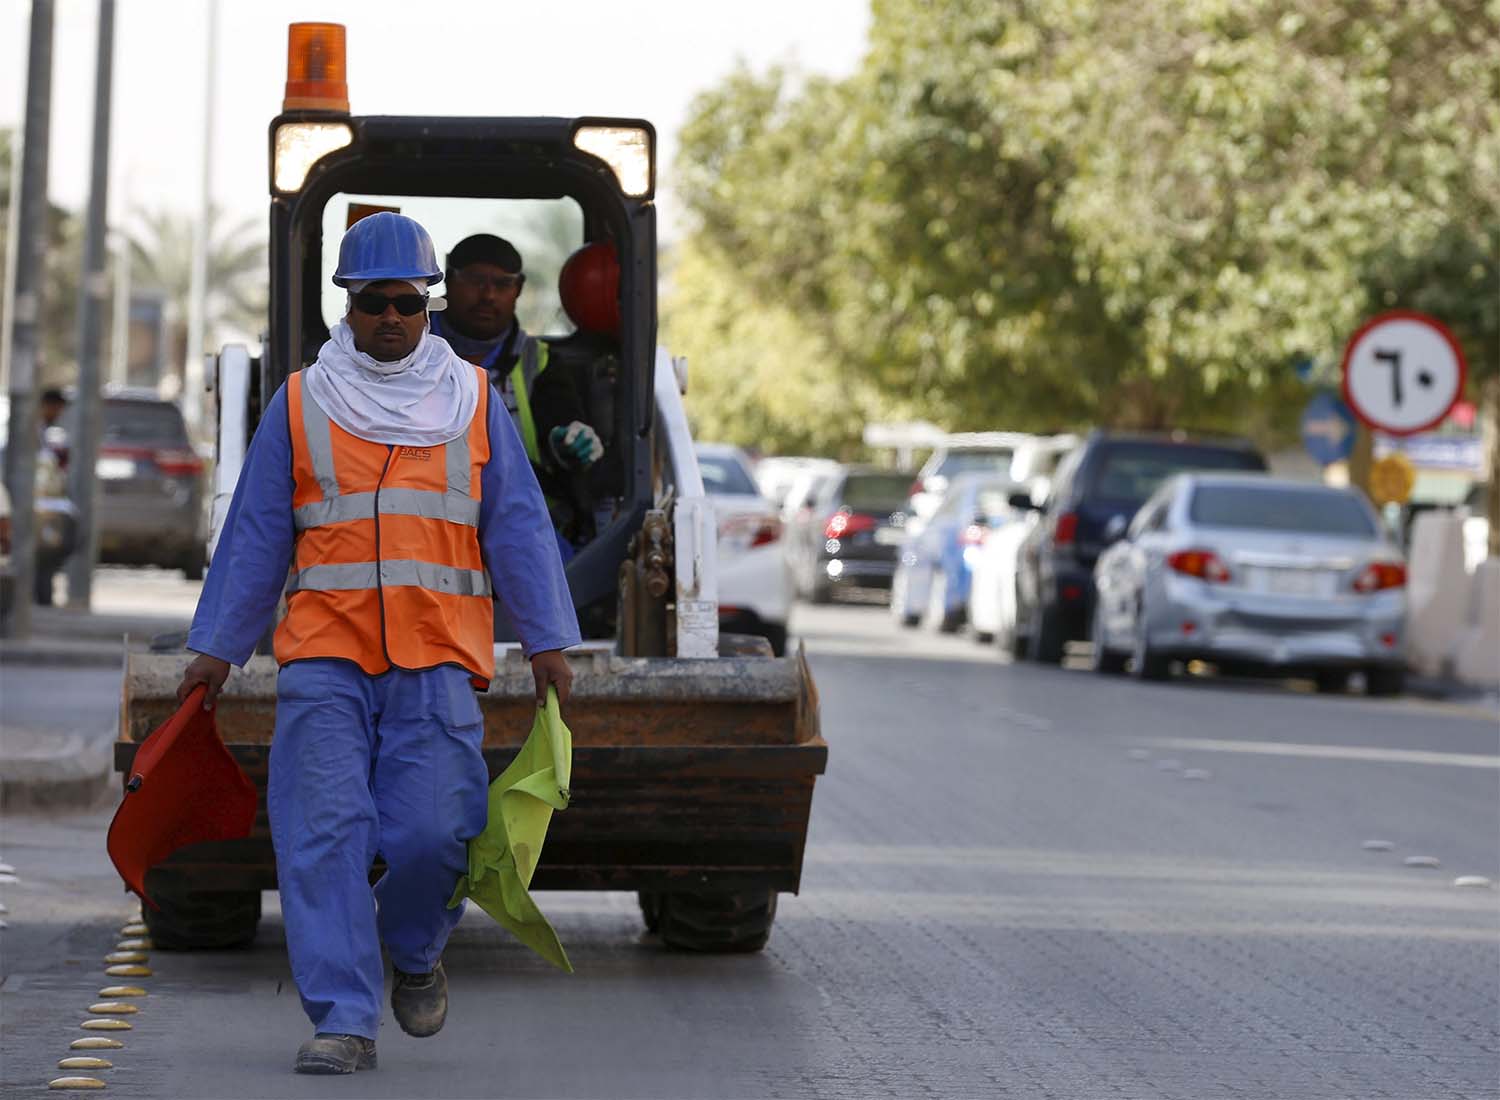 Foreign workers will have the right to leave Saudi Arabia without employers' permission